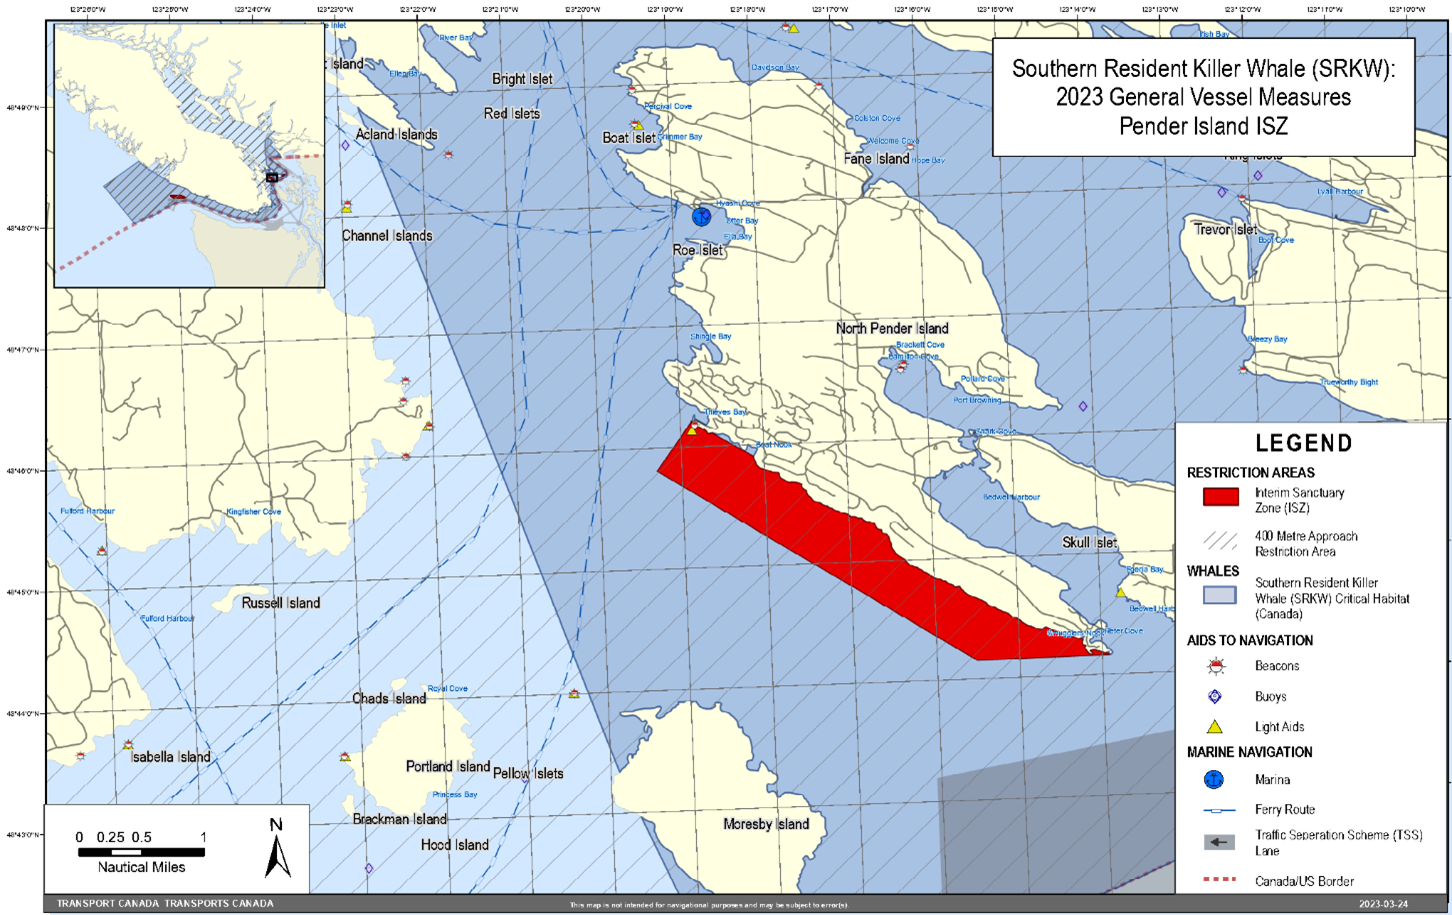 Rectangular map in grey, yellow and blue. It shows the Pender Island interim sanctuary zone in red, as part of the general vessel measures for the Southern Resident Killer Whales.